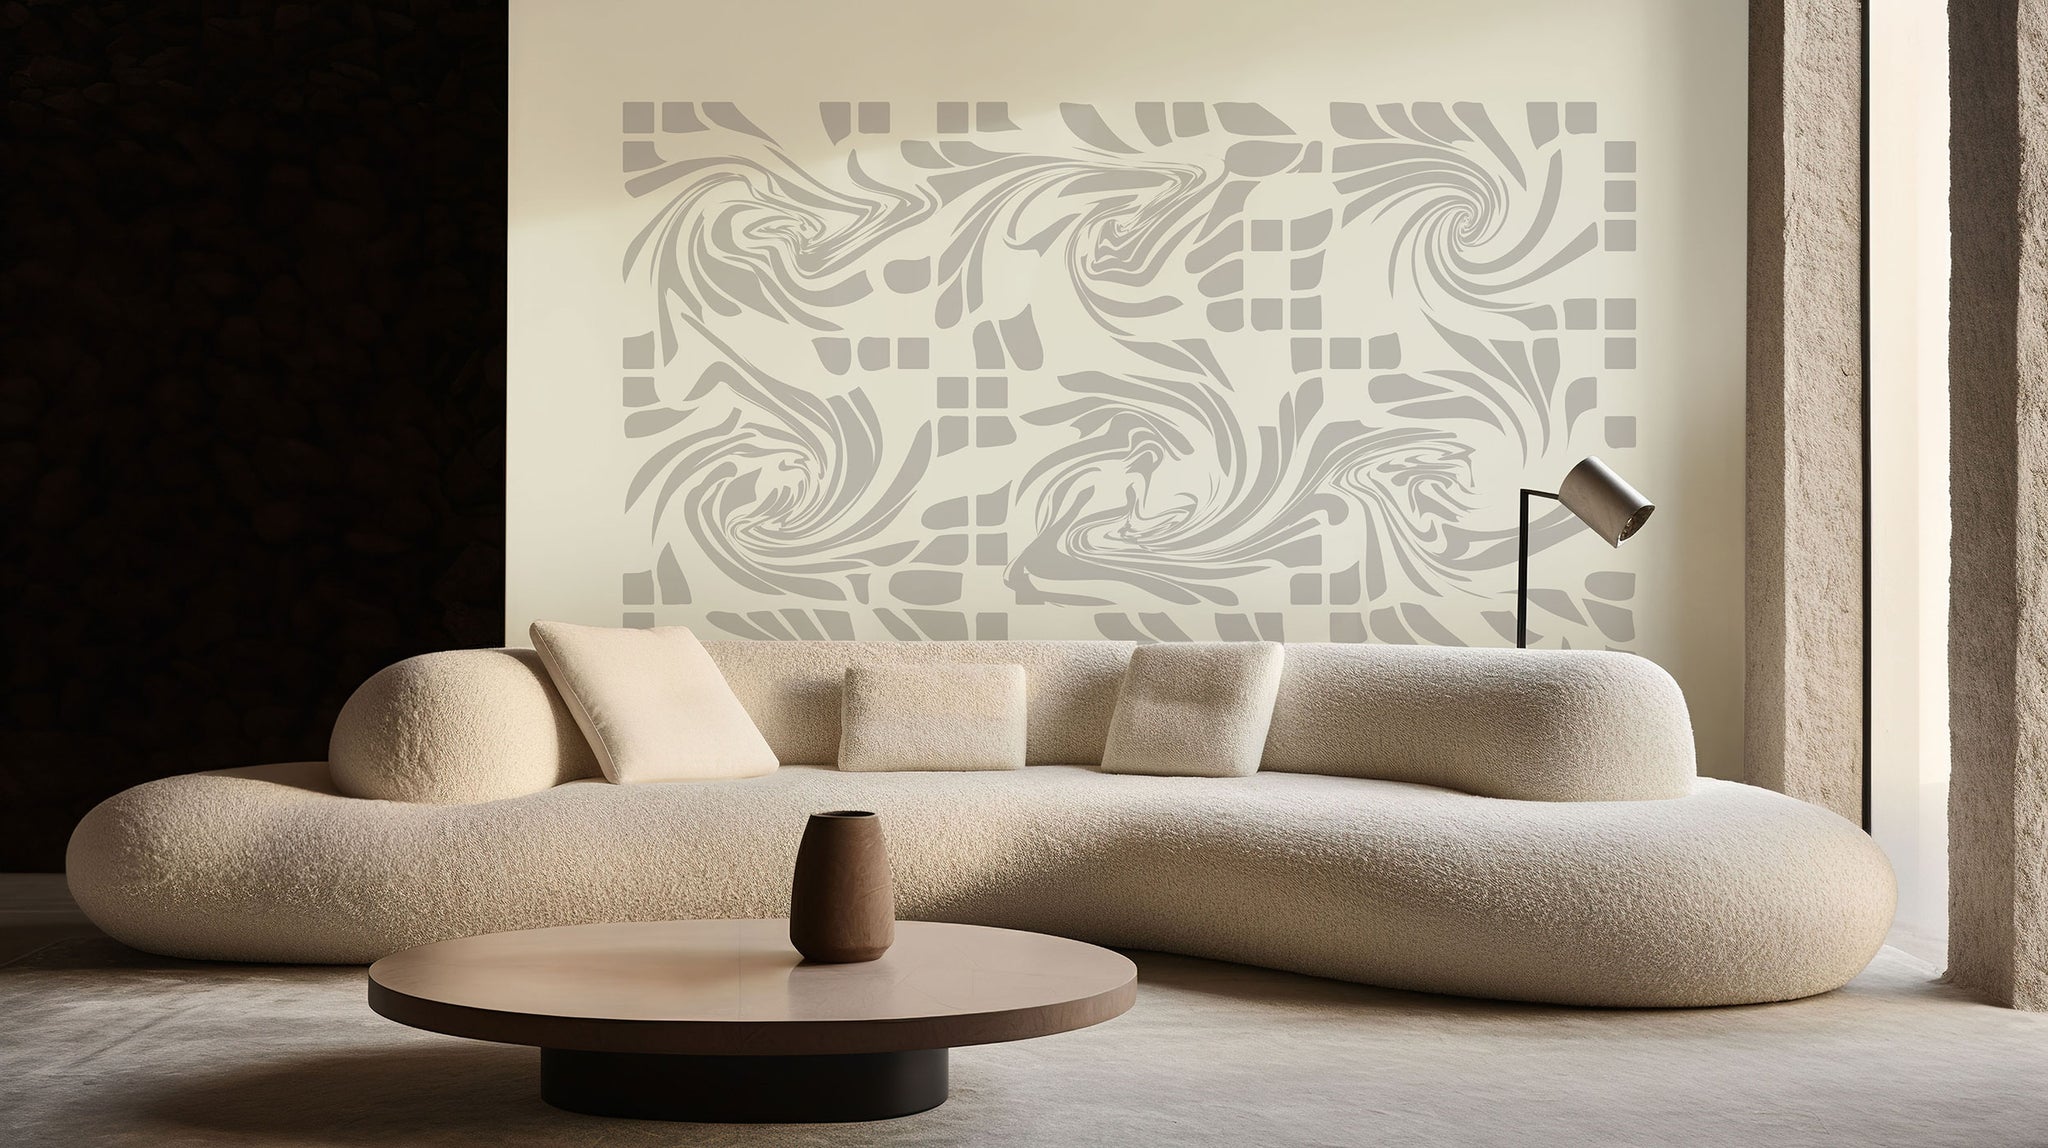 Peel and Stick Modern Wallpaper Contemporary Hypnosis Spiral Mural